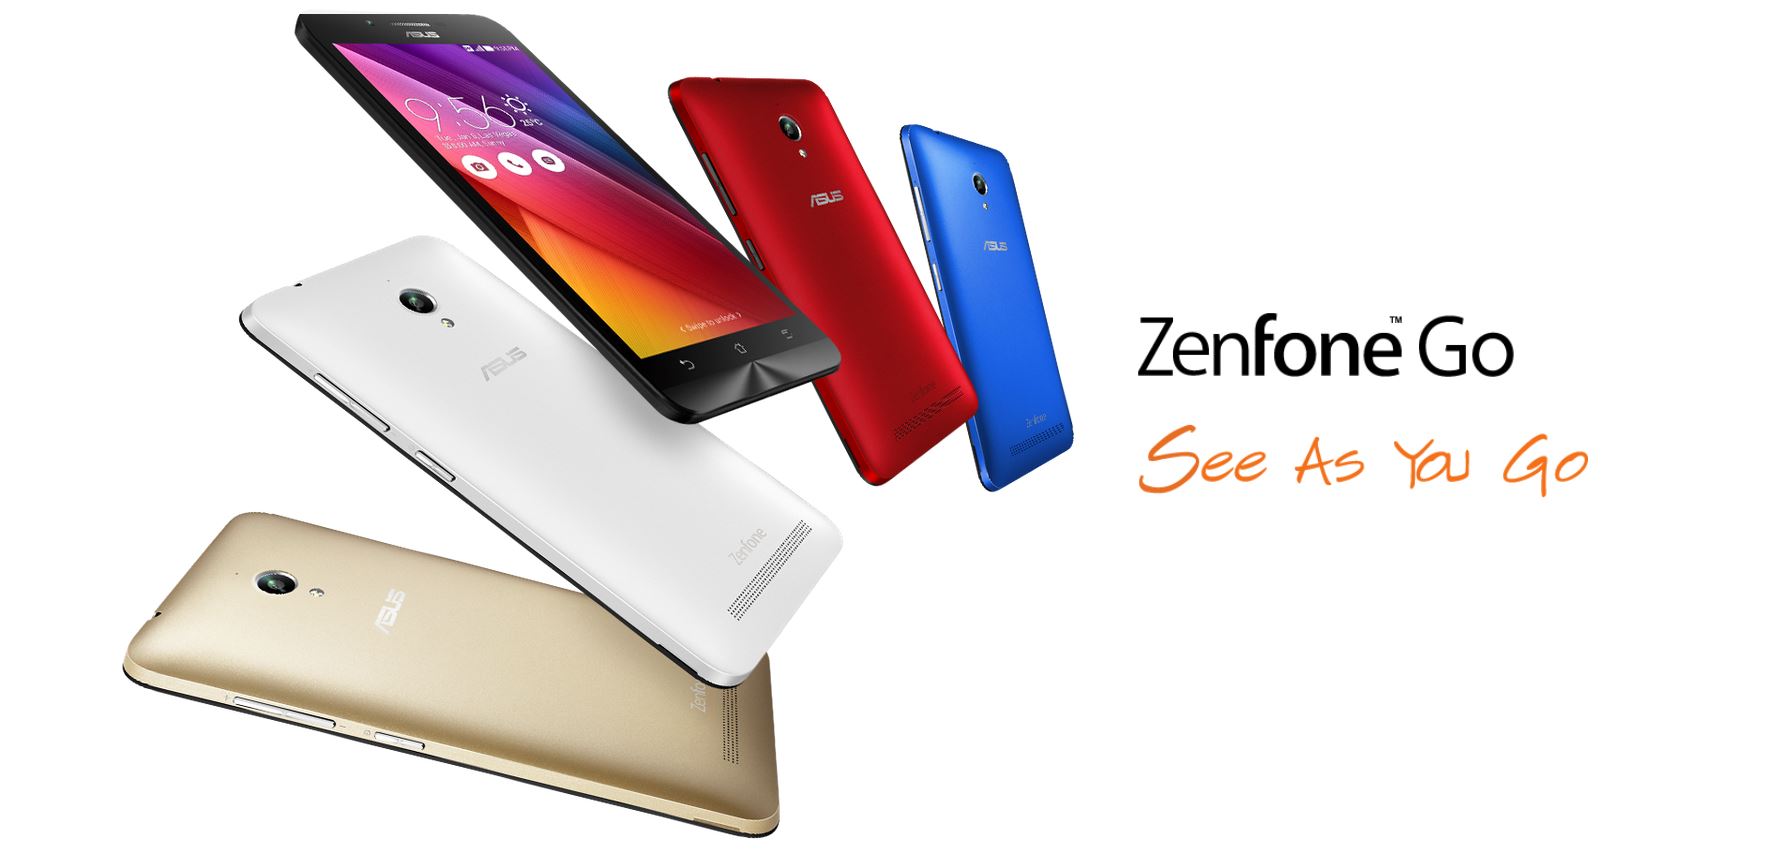 ASUS Zenfone GO is now available in ASUS MY store 32